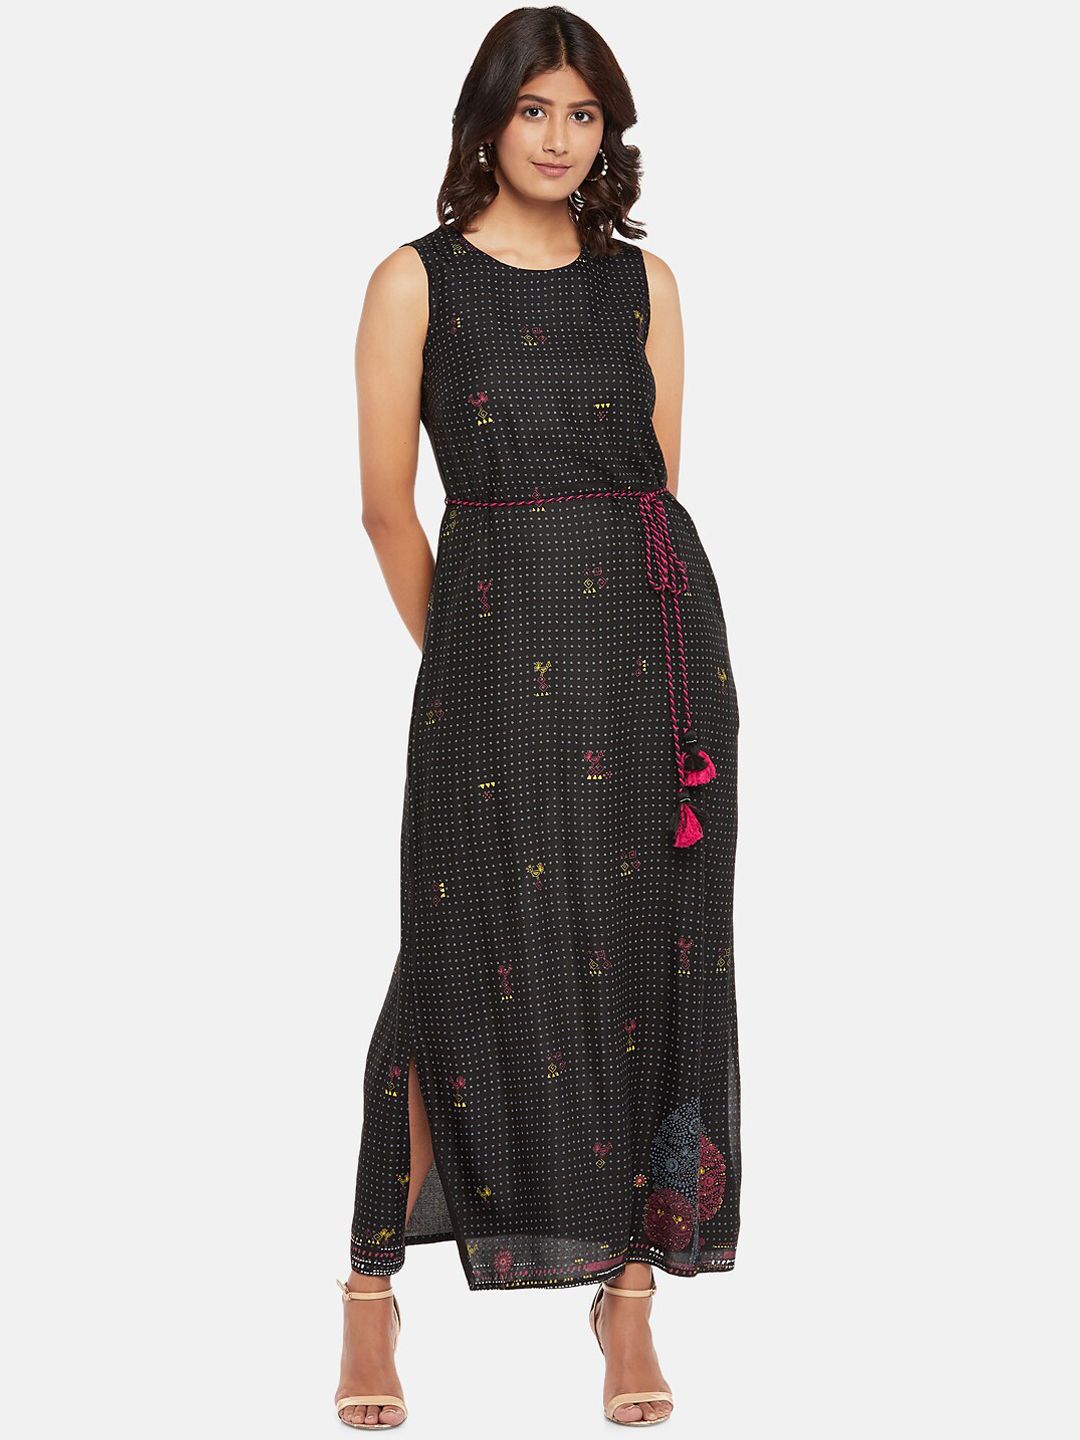 AKKRITI BY PANTALOONS Women Black & Blue Ethnic Motifs Printed Belted Maxi Dress Price in India